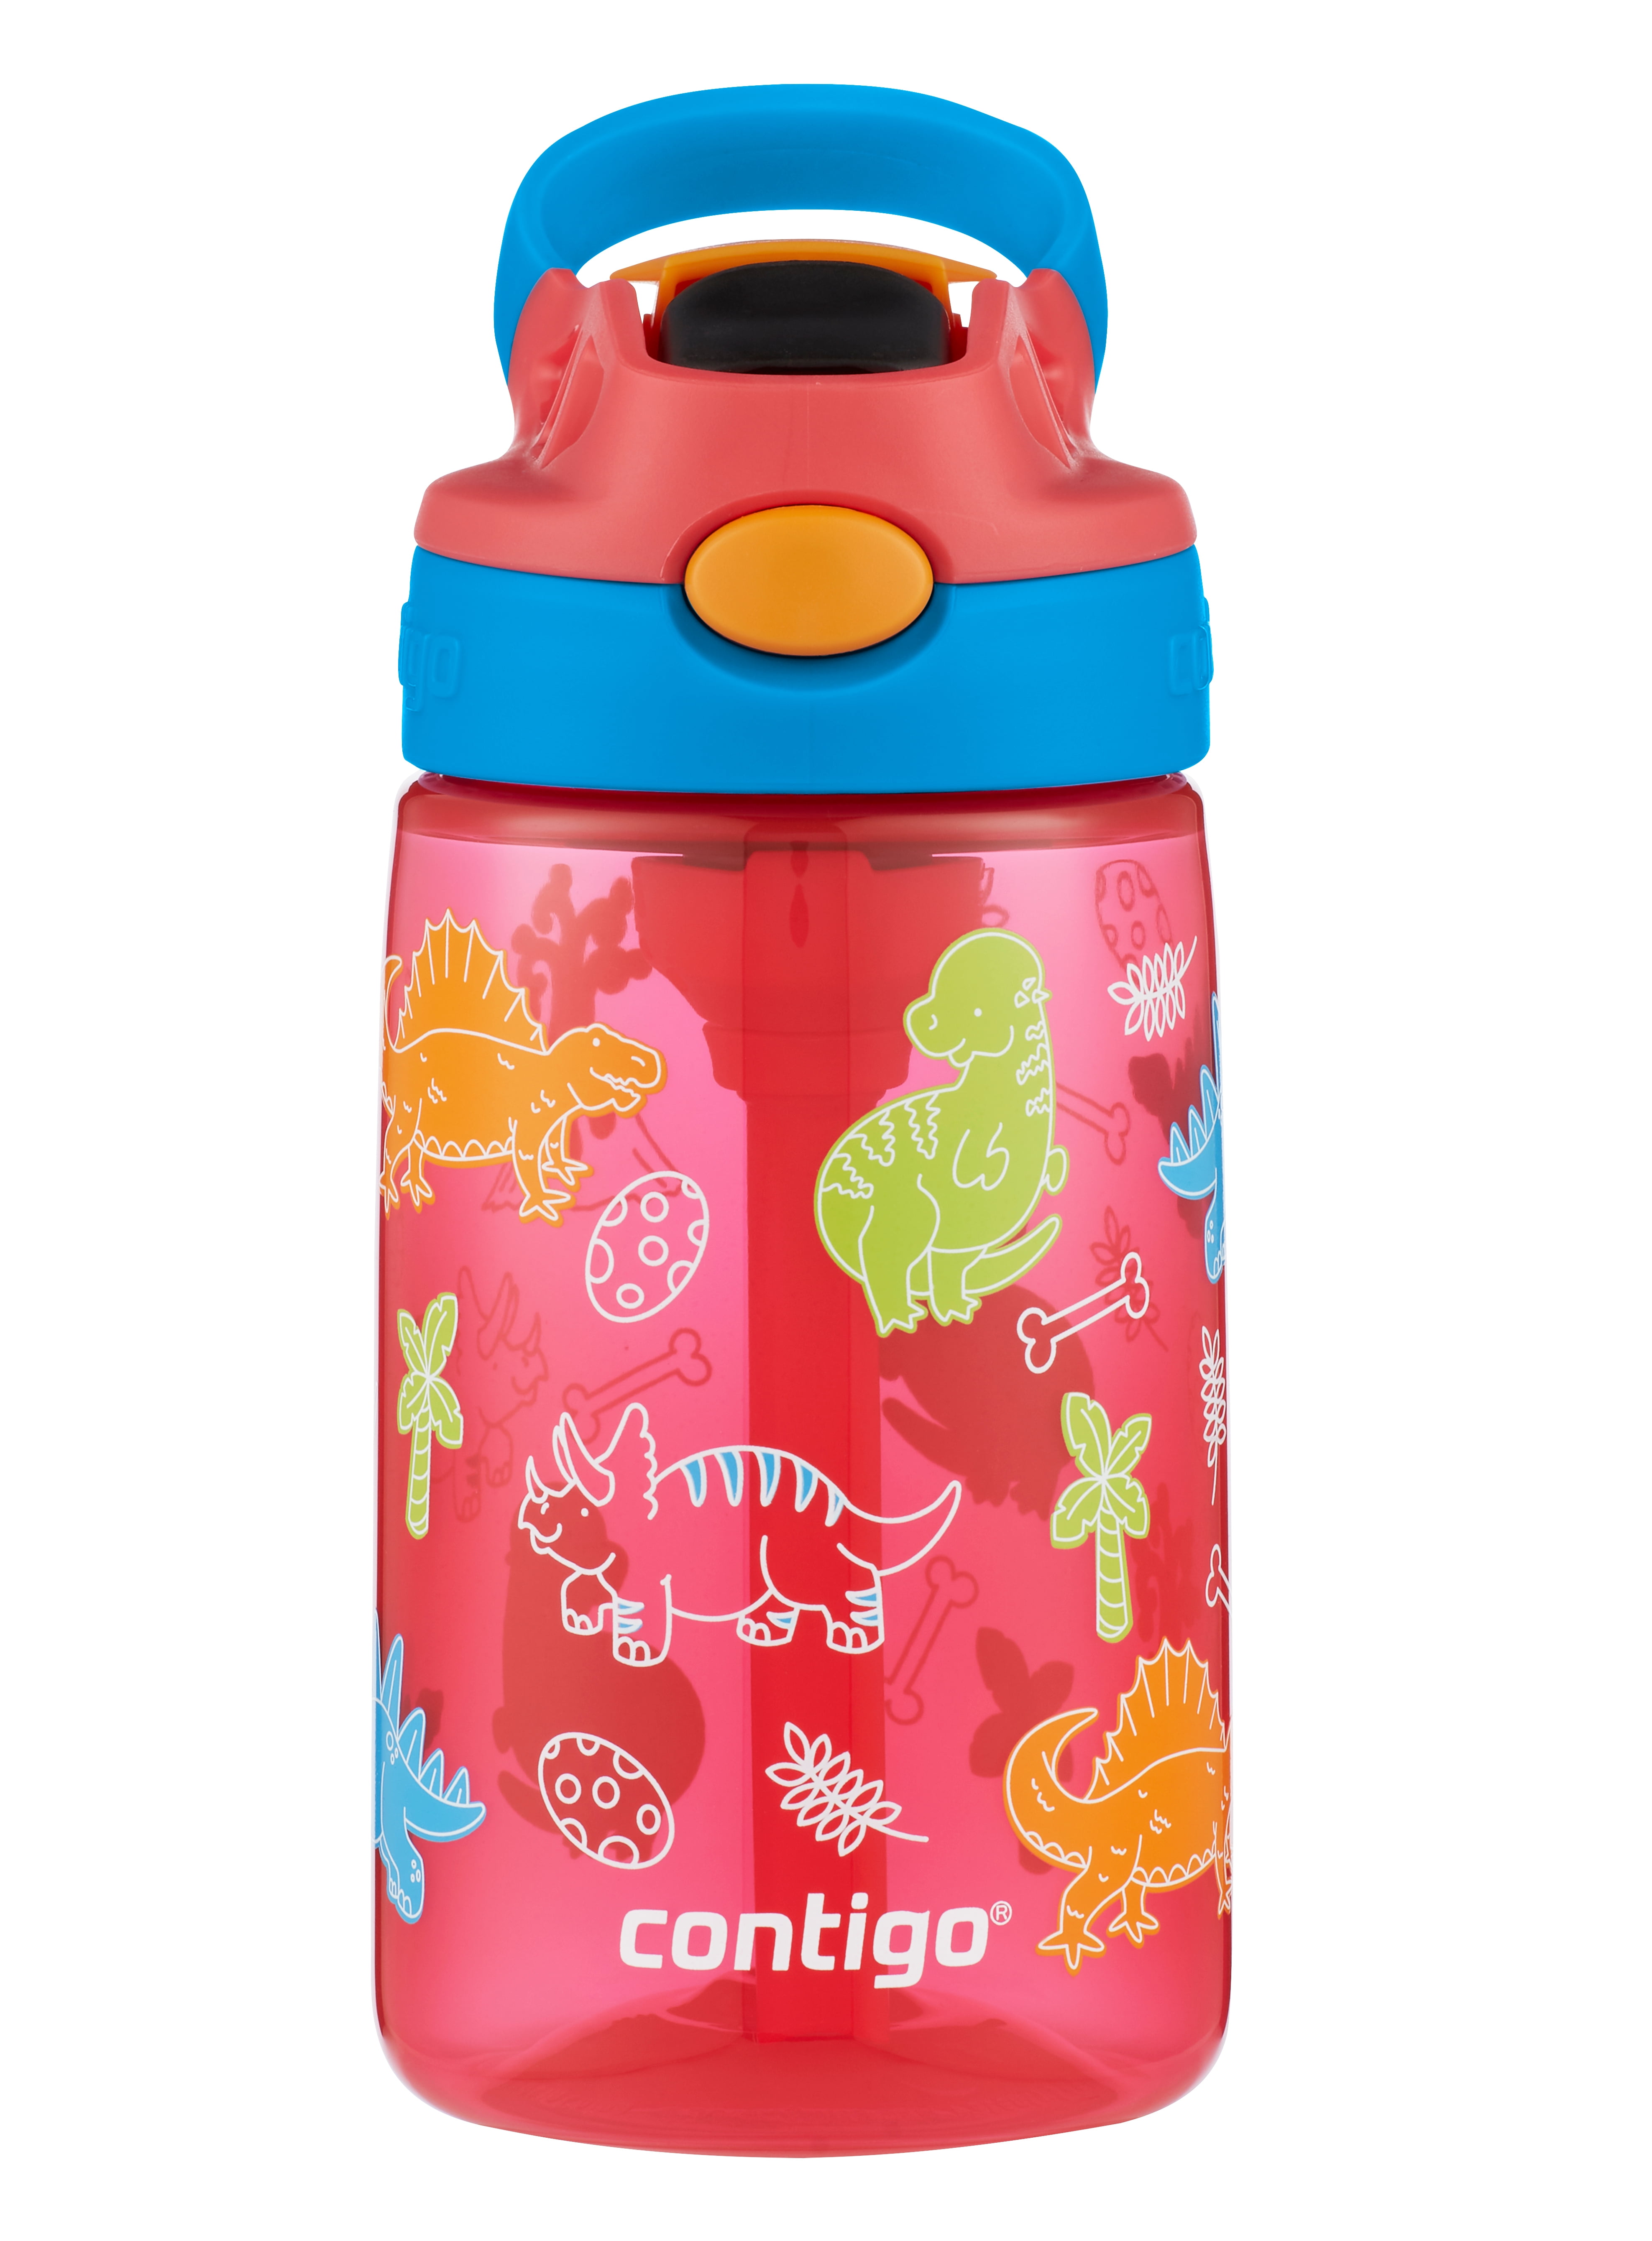 Contigo Kids Insulated Reusable Lunch Box with Antimicrobial Protected  Liner and Water Bottle Holder, Watermelon Red and Blue Poppy with Little  Dino Heard 